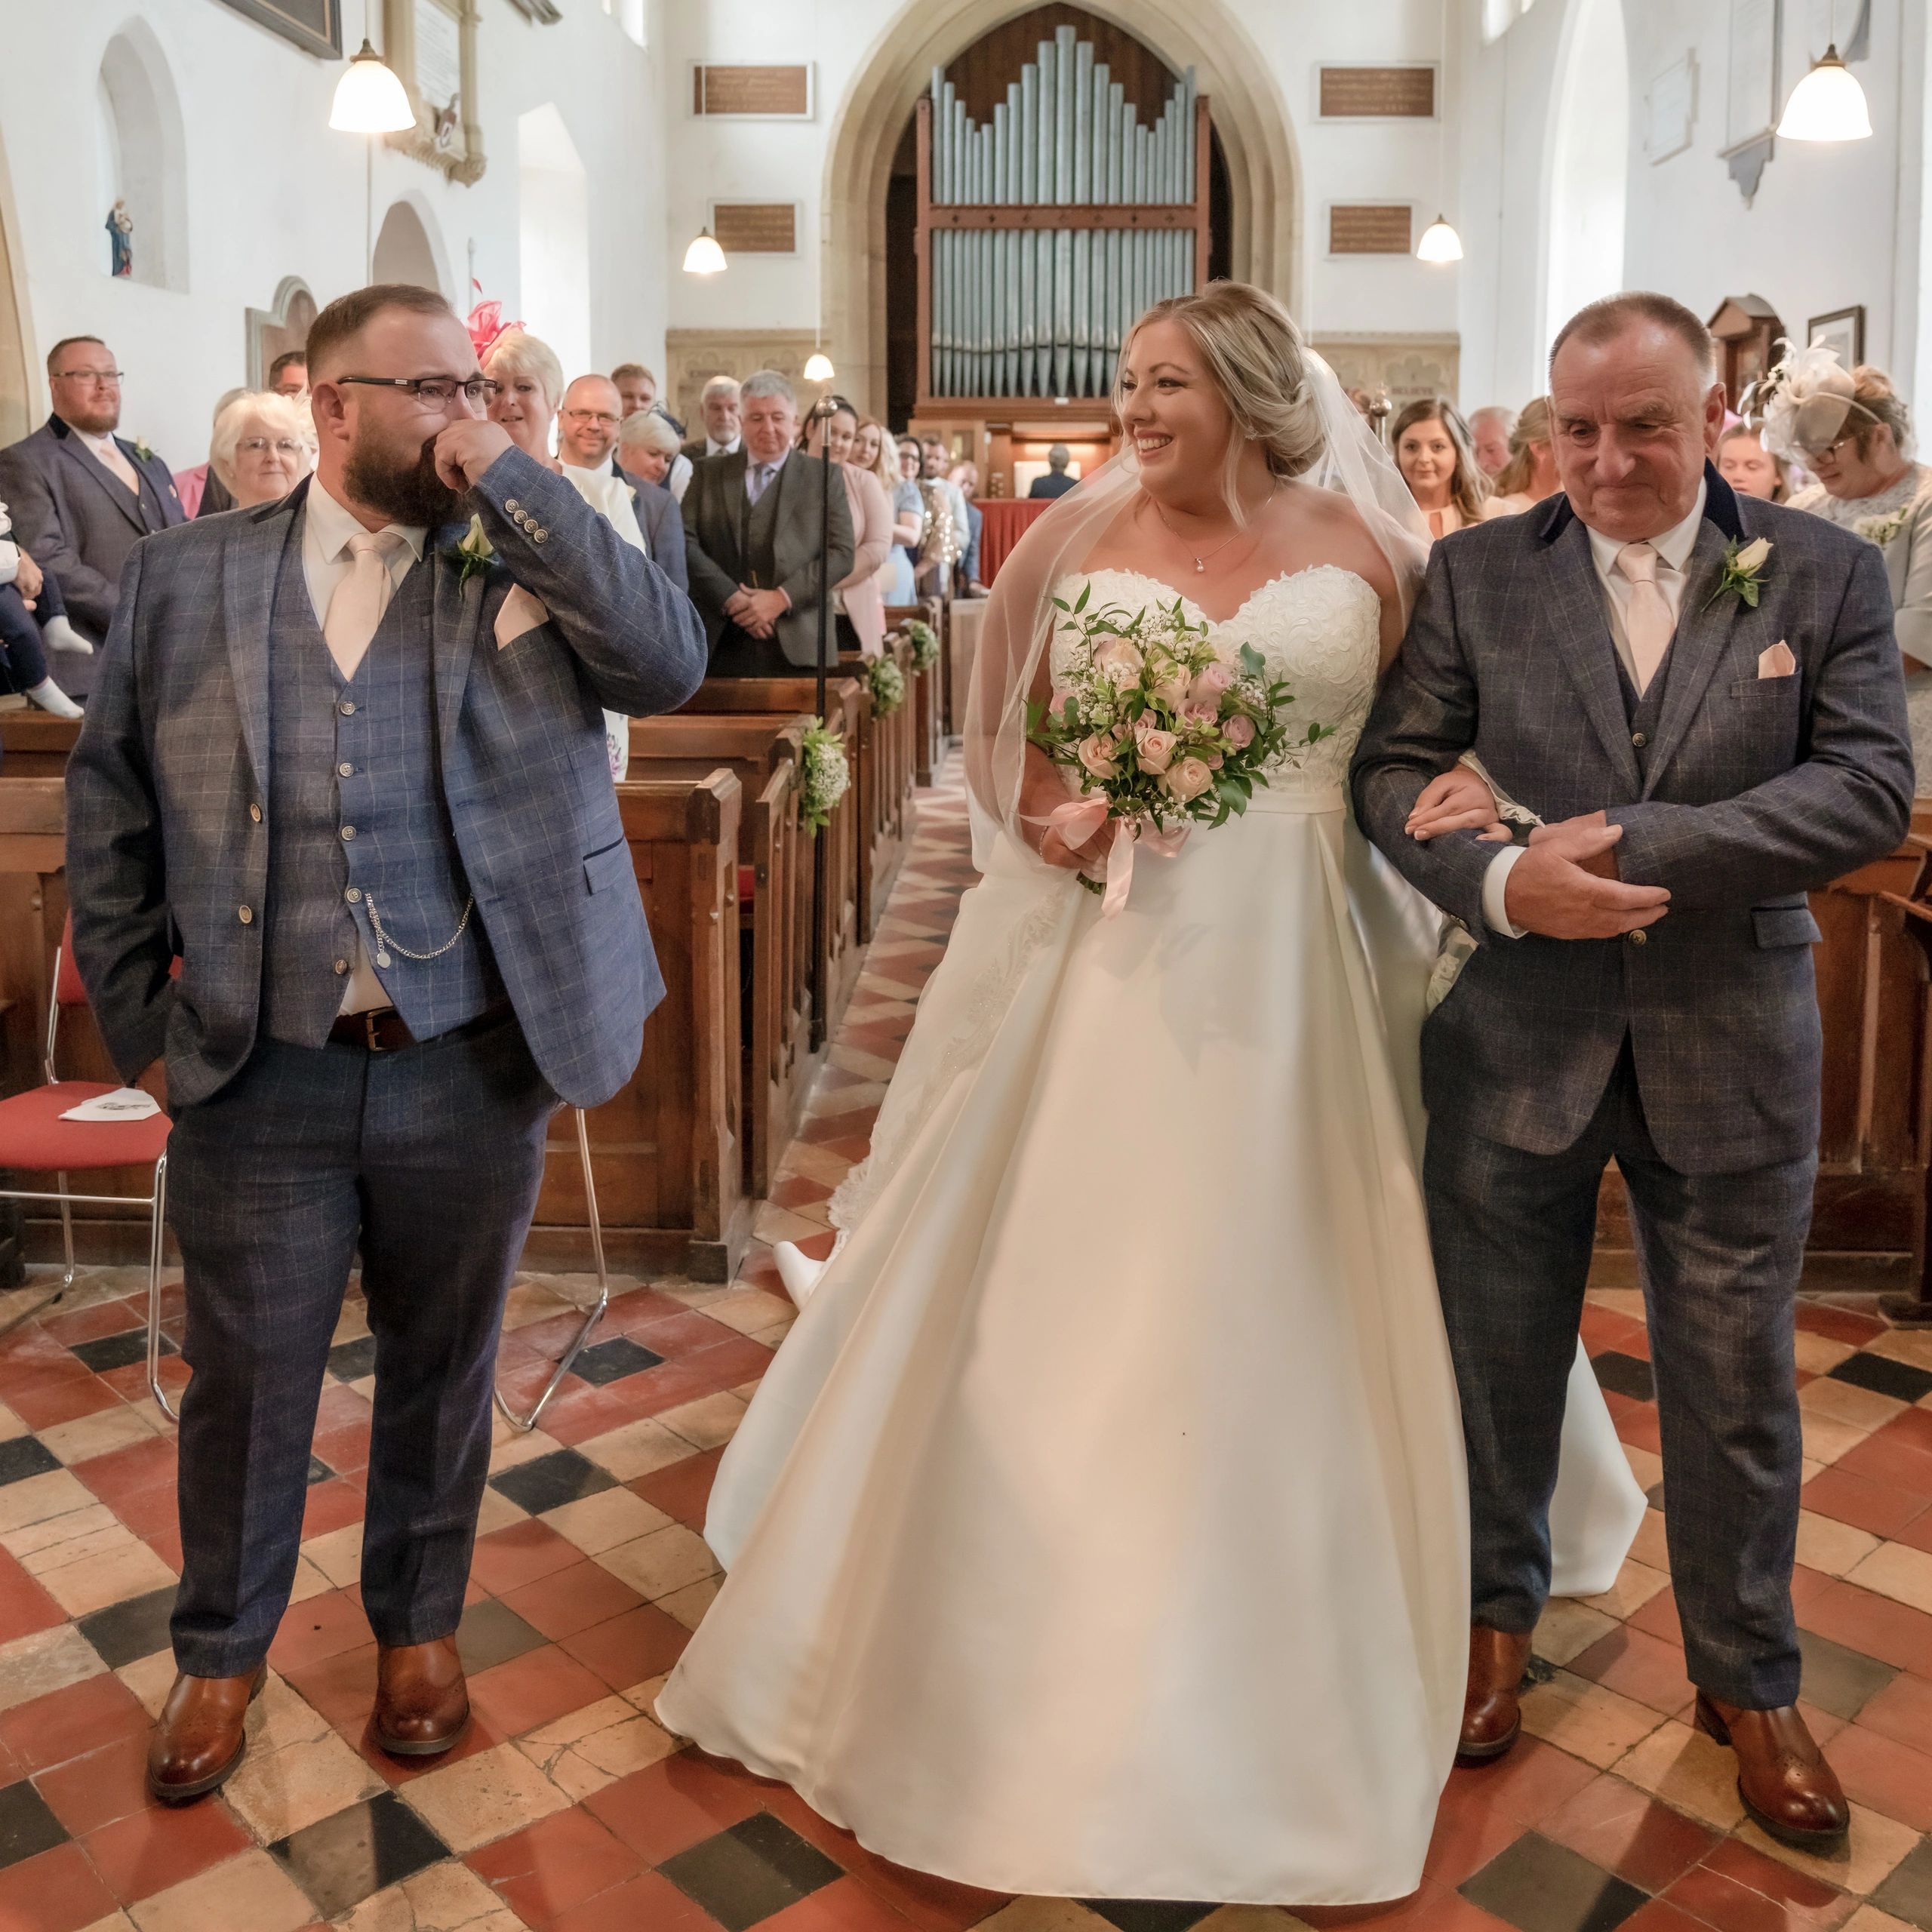 Wedding Oxfordshire, Wantage photograph by Laura Miler photography photo WIltshire Berkshire candid